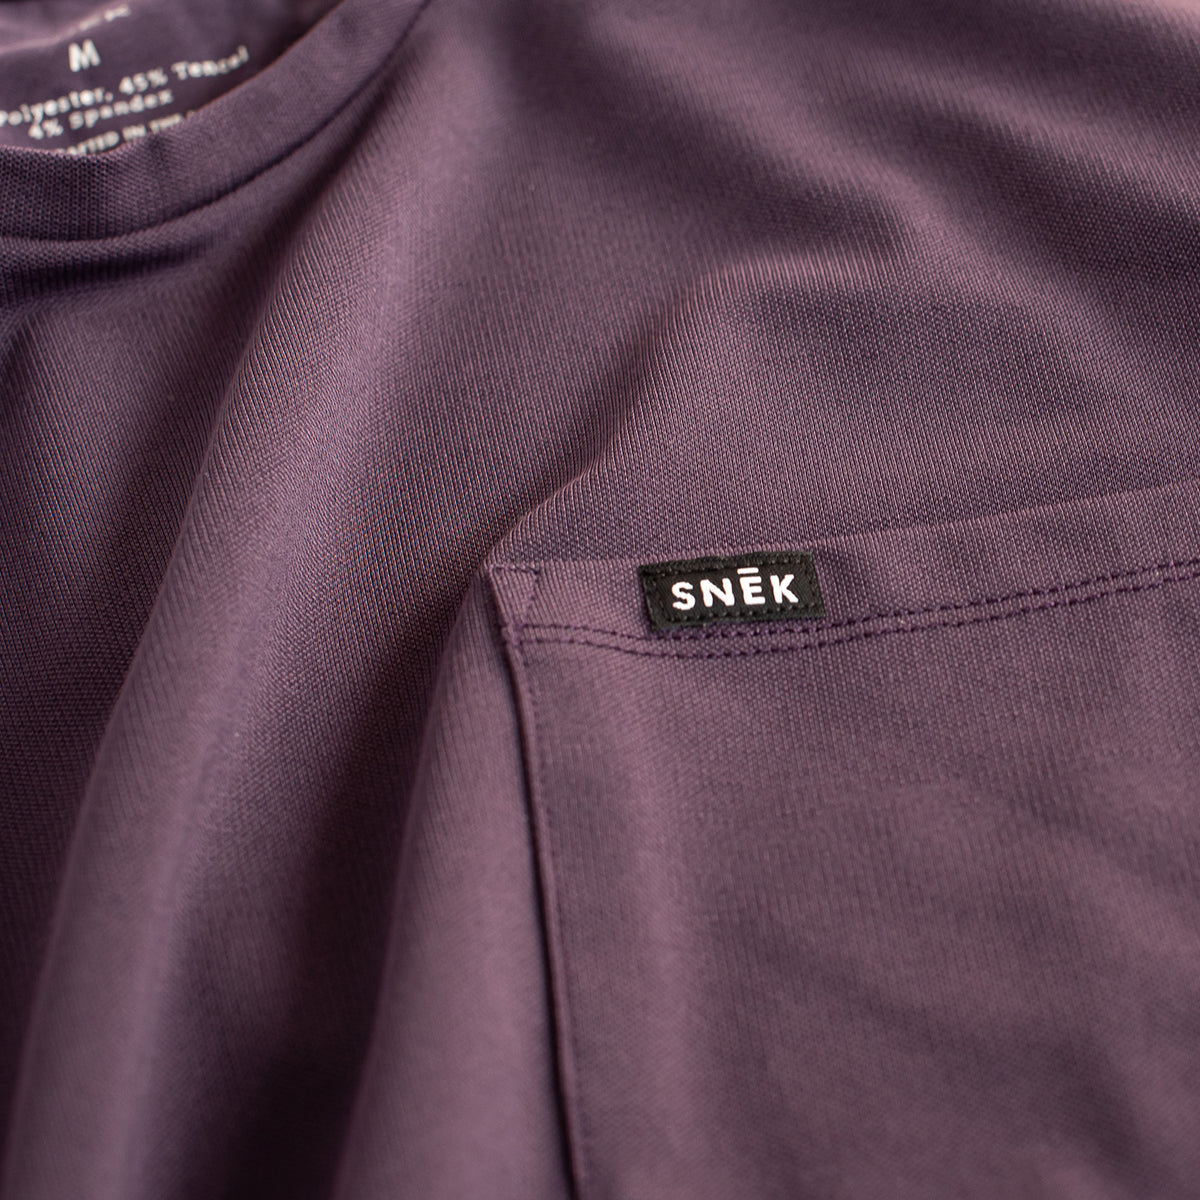 snek cycling tee and jersey pocket and snek labe detail shot